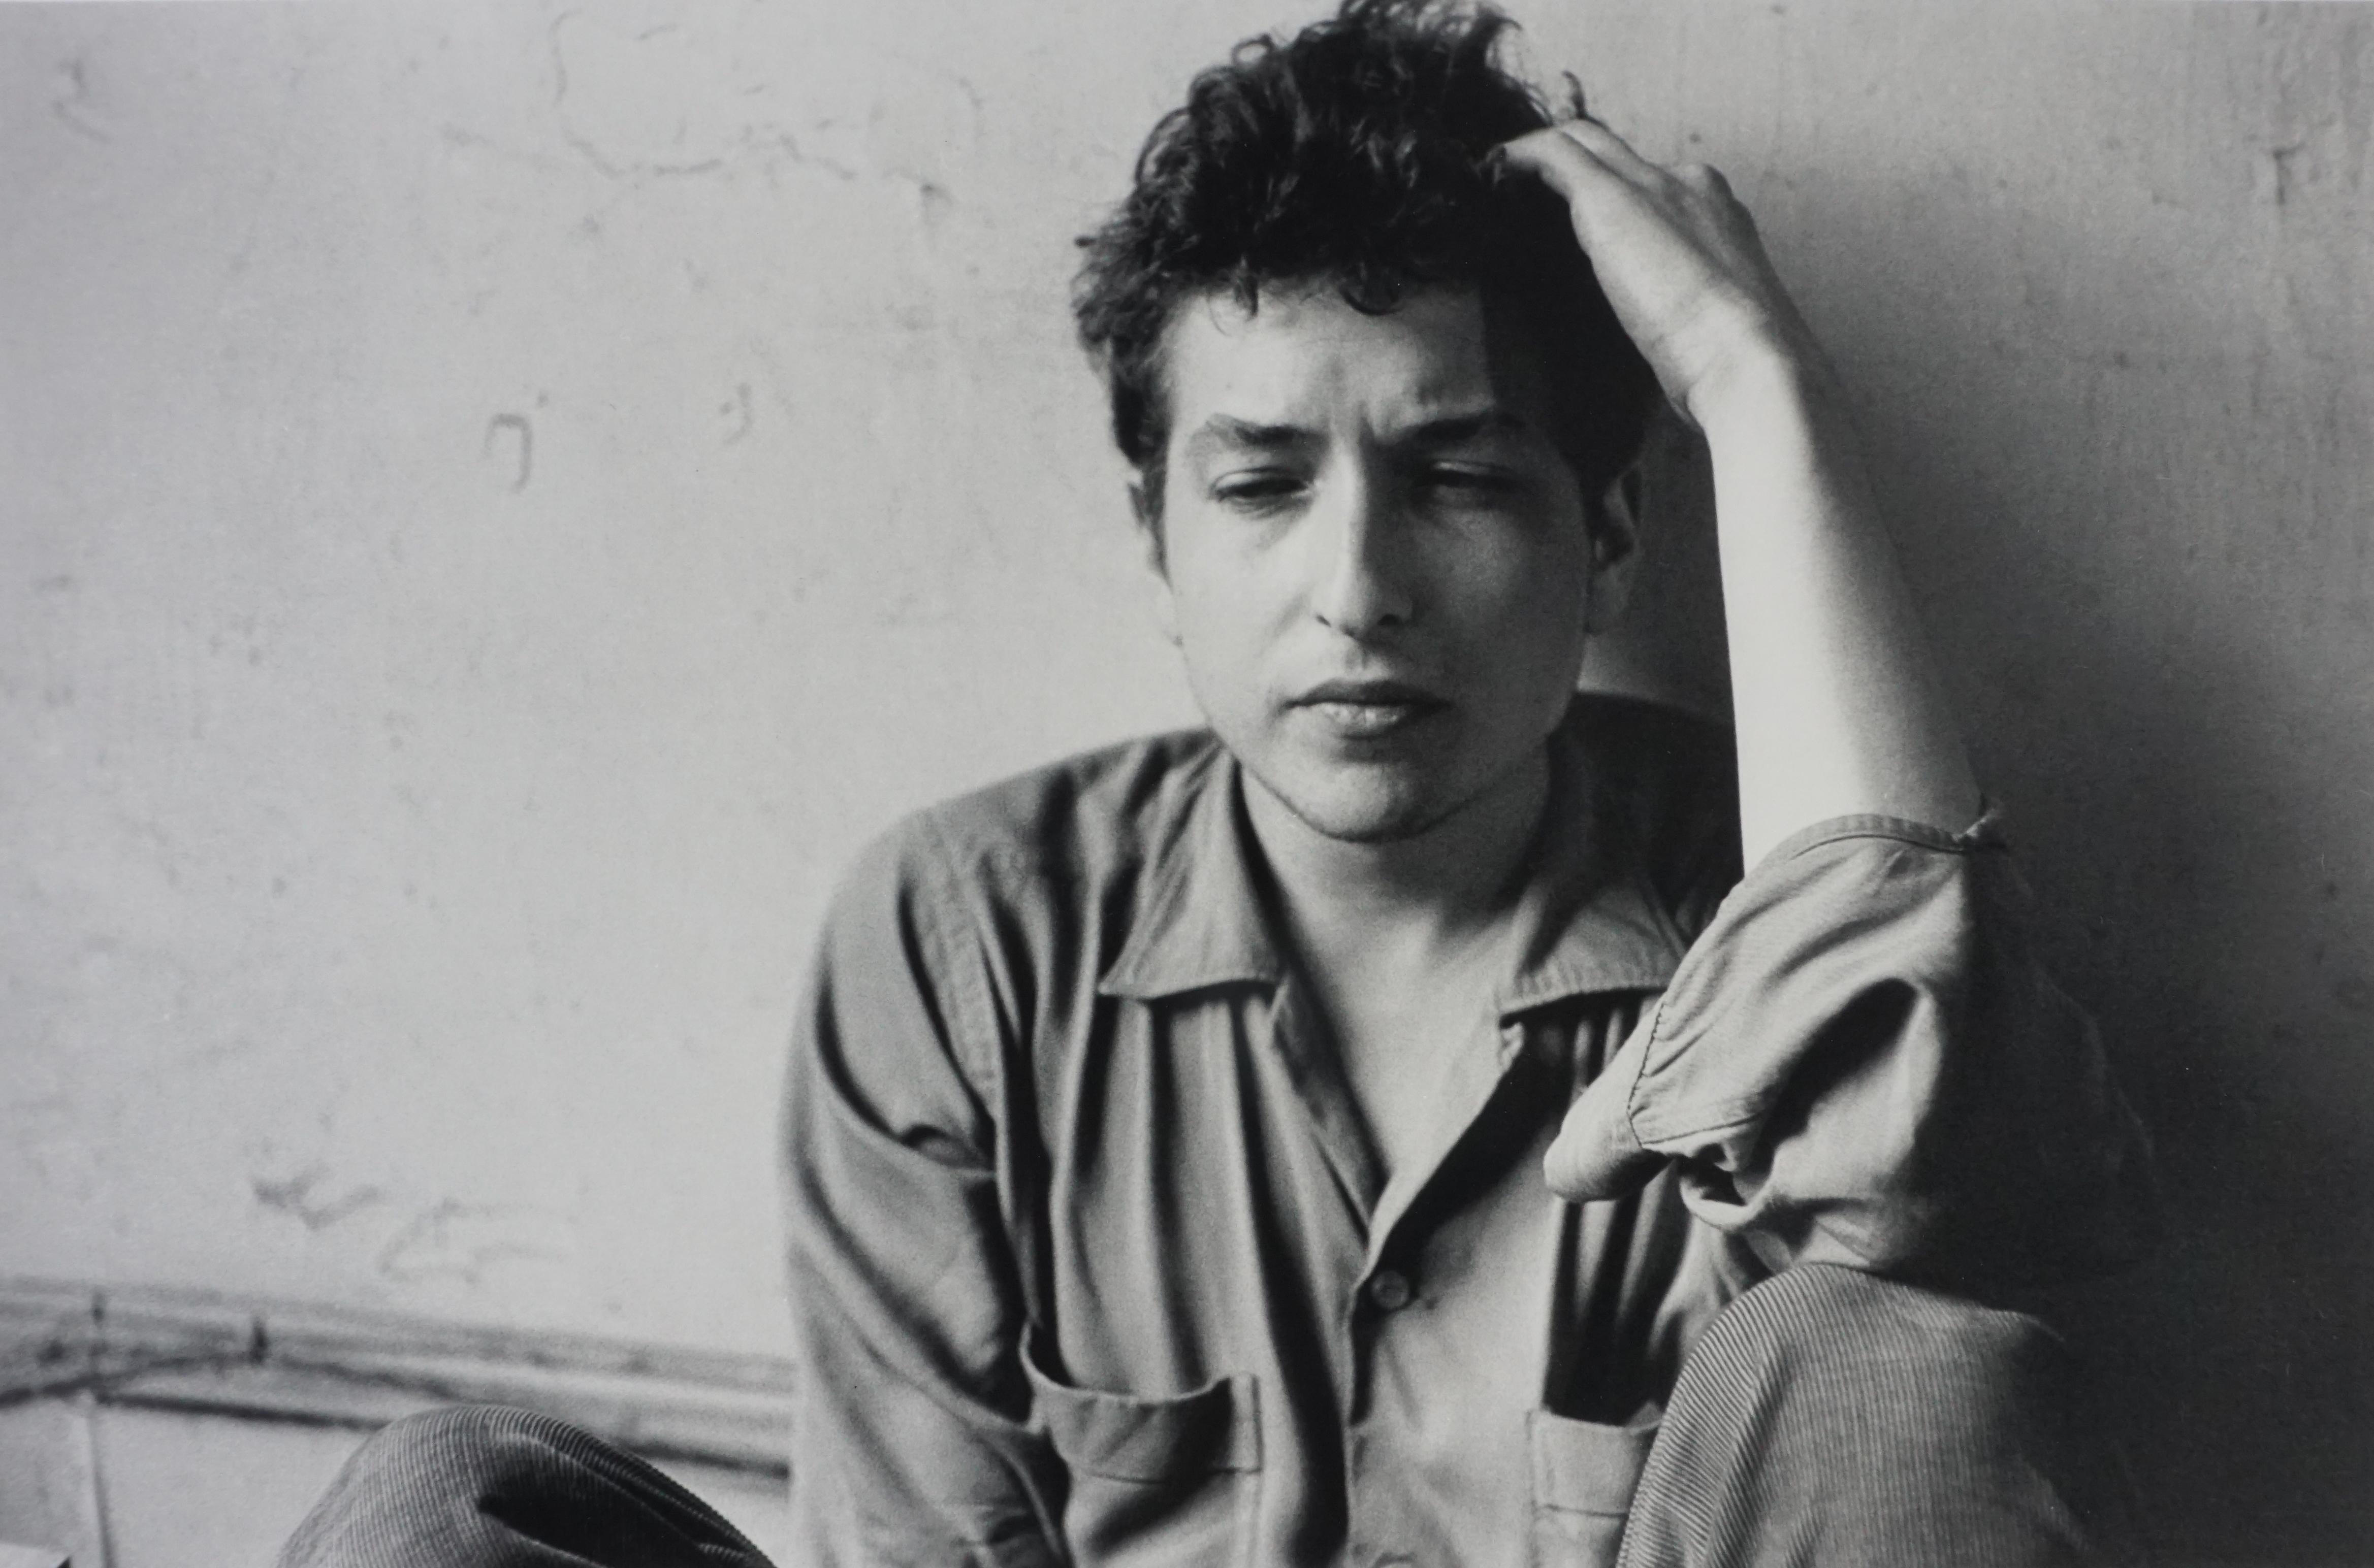 John Cohen Black and White Photograph - Bob Dylan in My Loft, 1962 (printed later)